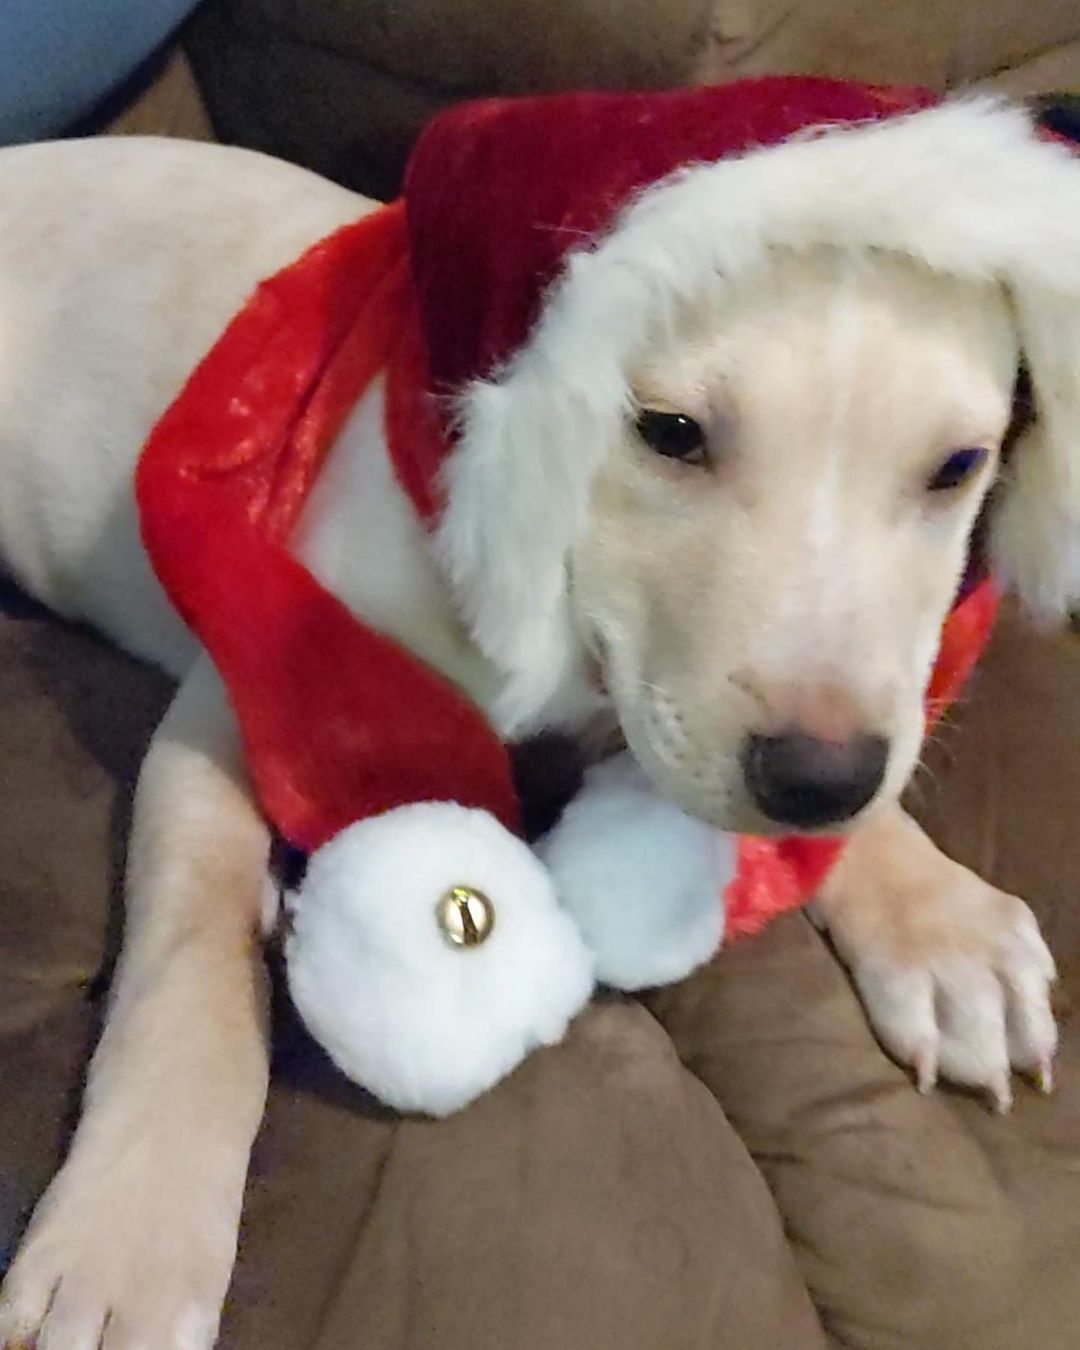 Butters is having a great time getting ready to deliver presents for Christmas 🤣🥰

💕
Get your applications in!
https://www.causendogrescue.org/adoption-application.html 
🐾
💕
🐾
We only do meet and greets for approved applications.

Adoption fee is $250.

All dogs will be Up-to-date on Shots, worming, Spayed/Neutered and Microchipped.  We will also do random, periodic vet checks to ensure all dogs adopted from us continue to have the best care.  We will check for any follow up visits needed and that they are on a monthly Heartworm Prevention.

If you rent or own a home, we prefer you to have a fenced in yard. 

Apartment living is also ok but prefer a fenced in area if close to the road.
All adults in the home will need to know they are getting a dog and will need to sign the adoption agreement.
We do not adopt to college students with multiple roommates. 
Military will need to provide a backup plan.
We require all pets in the home to be spay and/or neutered. Because too many dogs are being killed, due to there not being enough homes per dog in need. Only the lucky ones end up here.